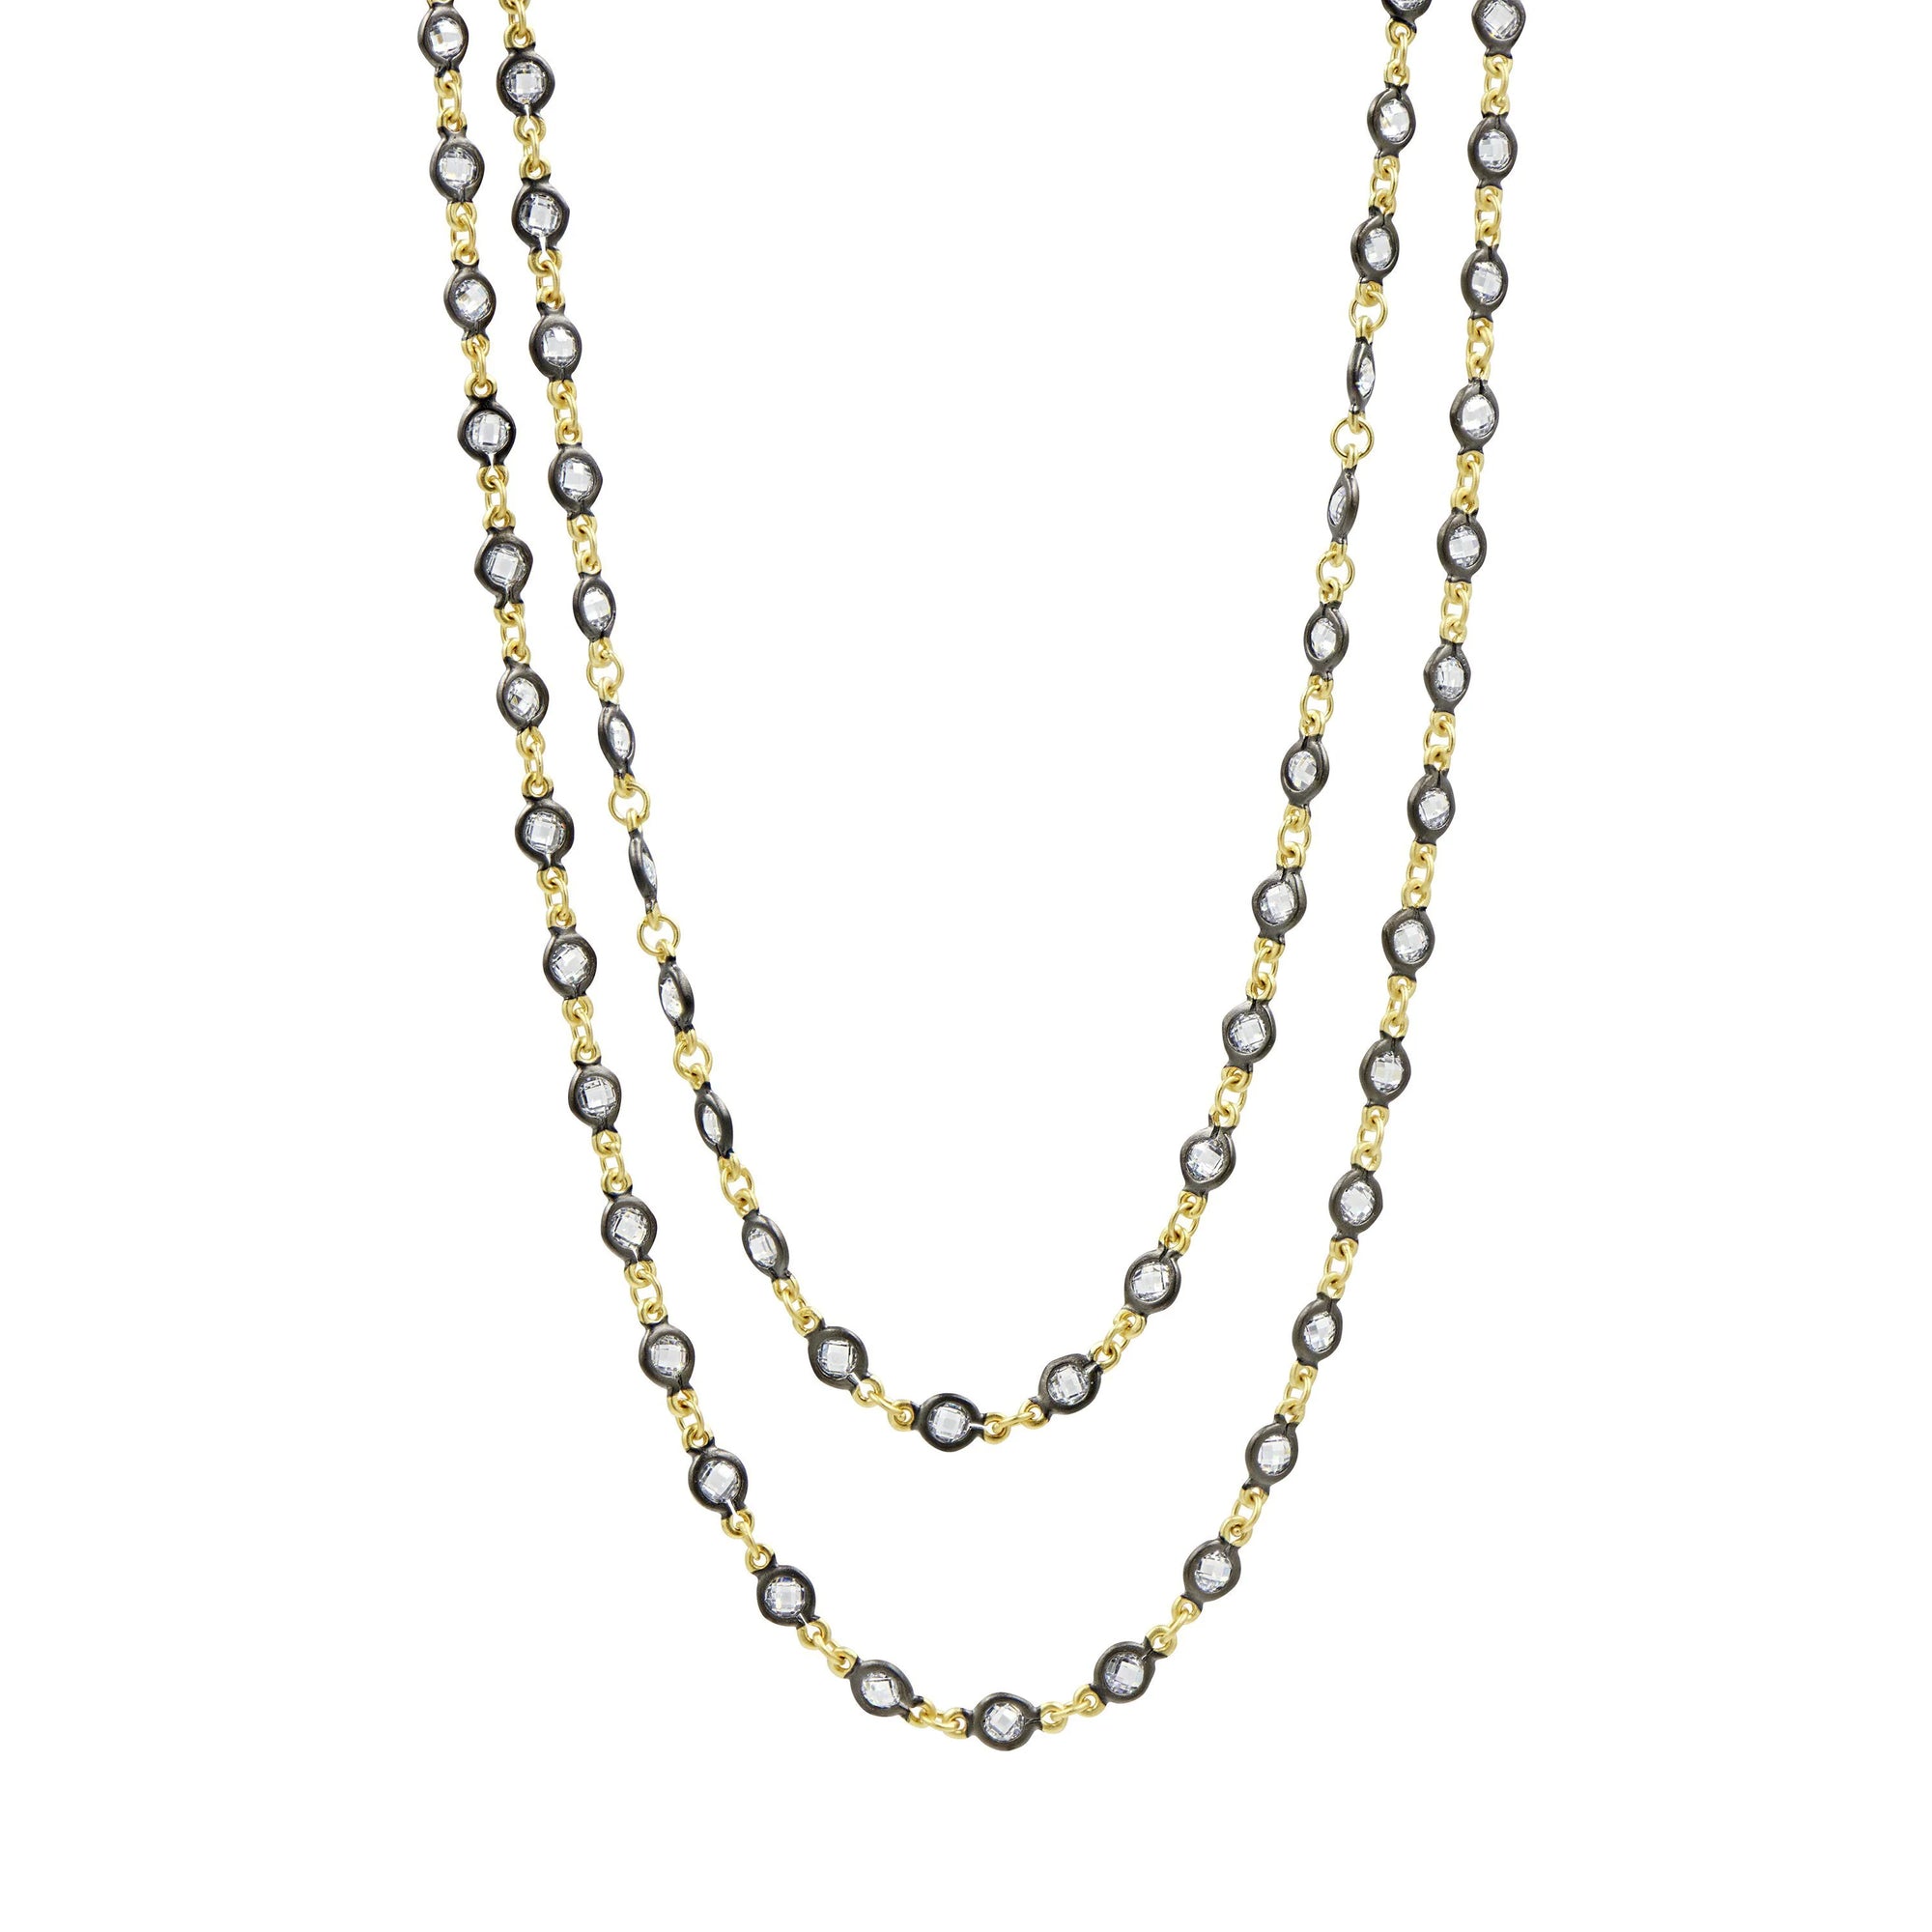 Freida Rothman "Faceted Stones Wrap Chain Necklace"